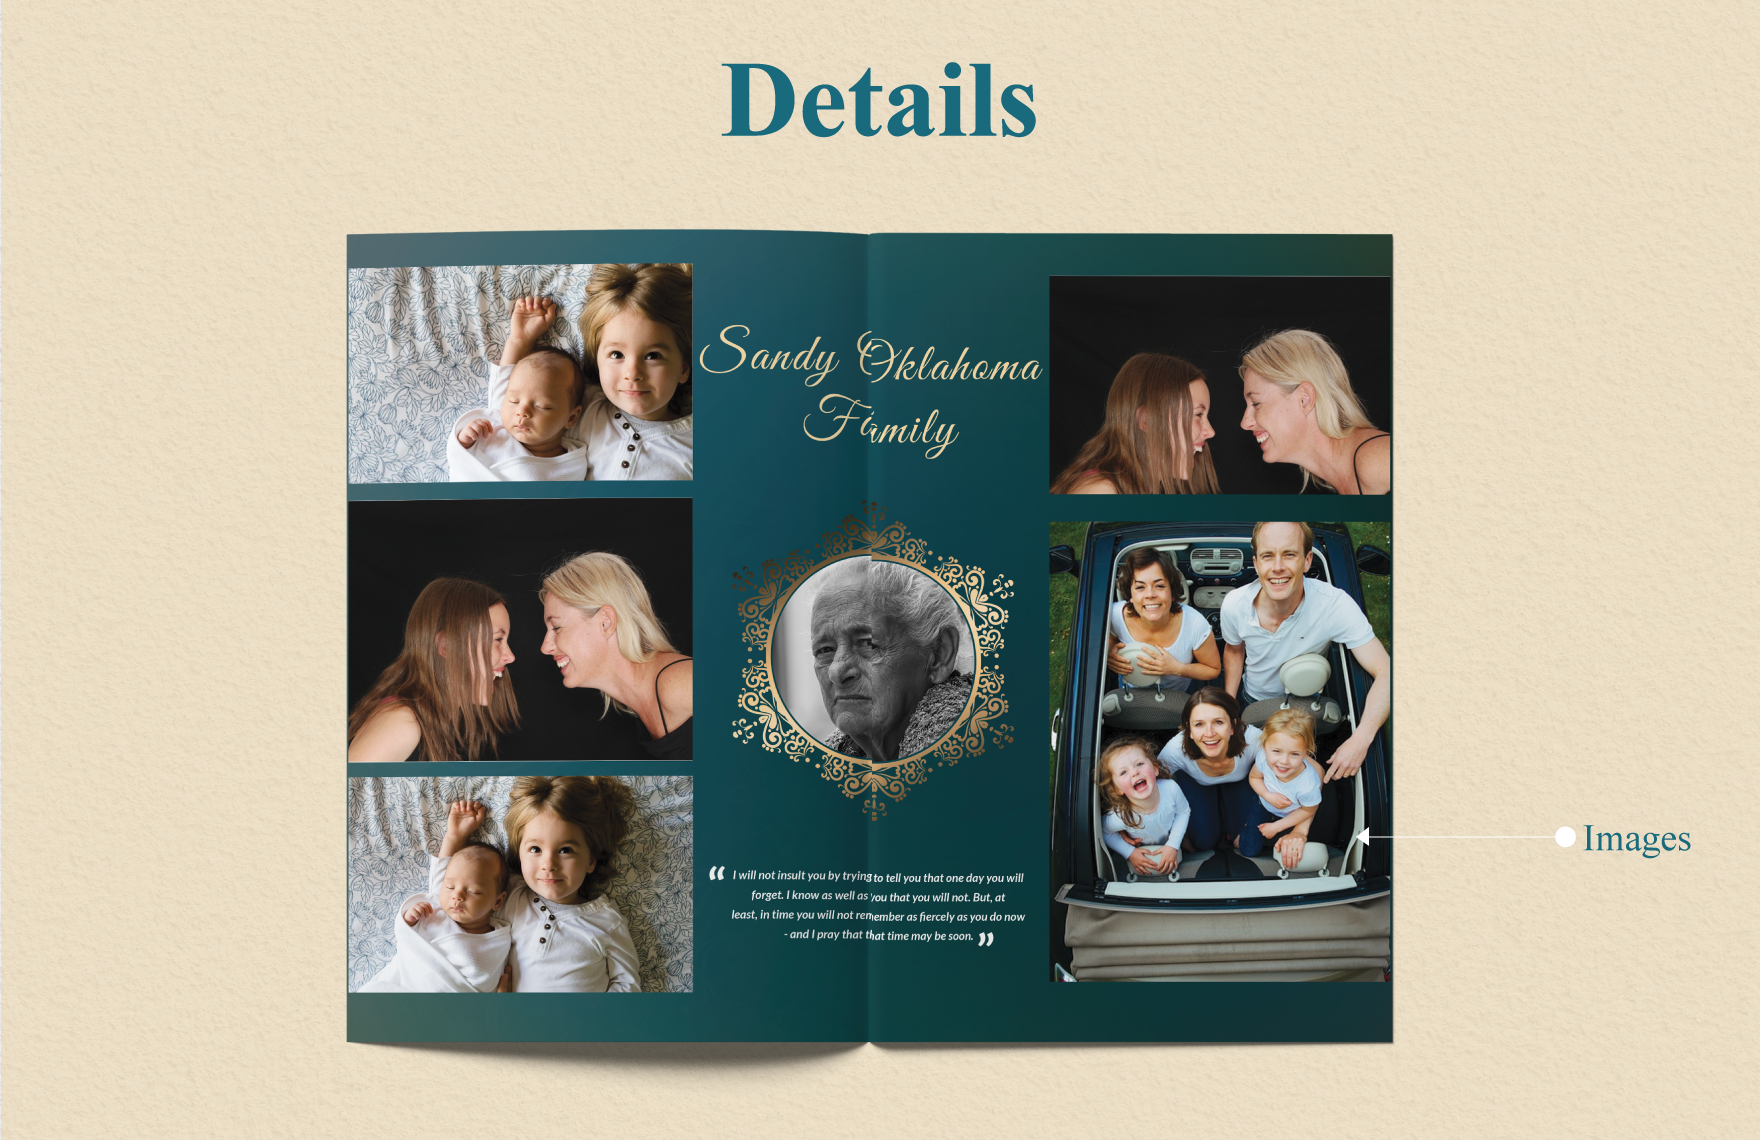 Obituary Funeral Booklet Template